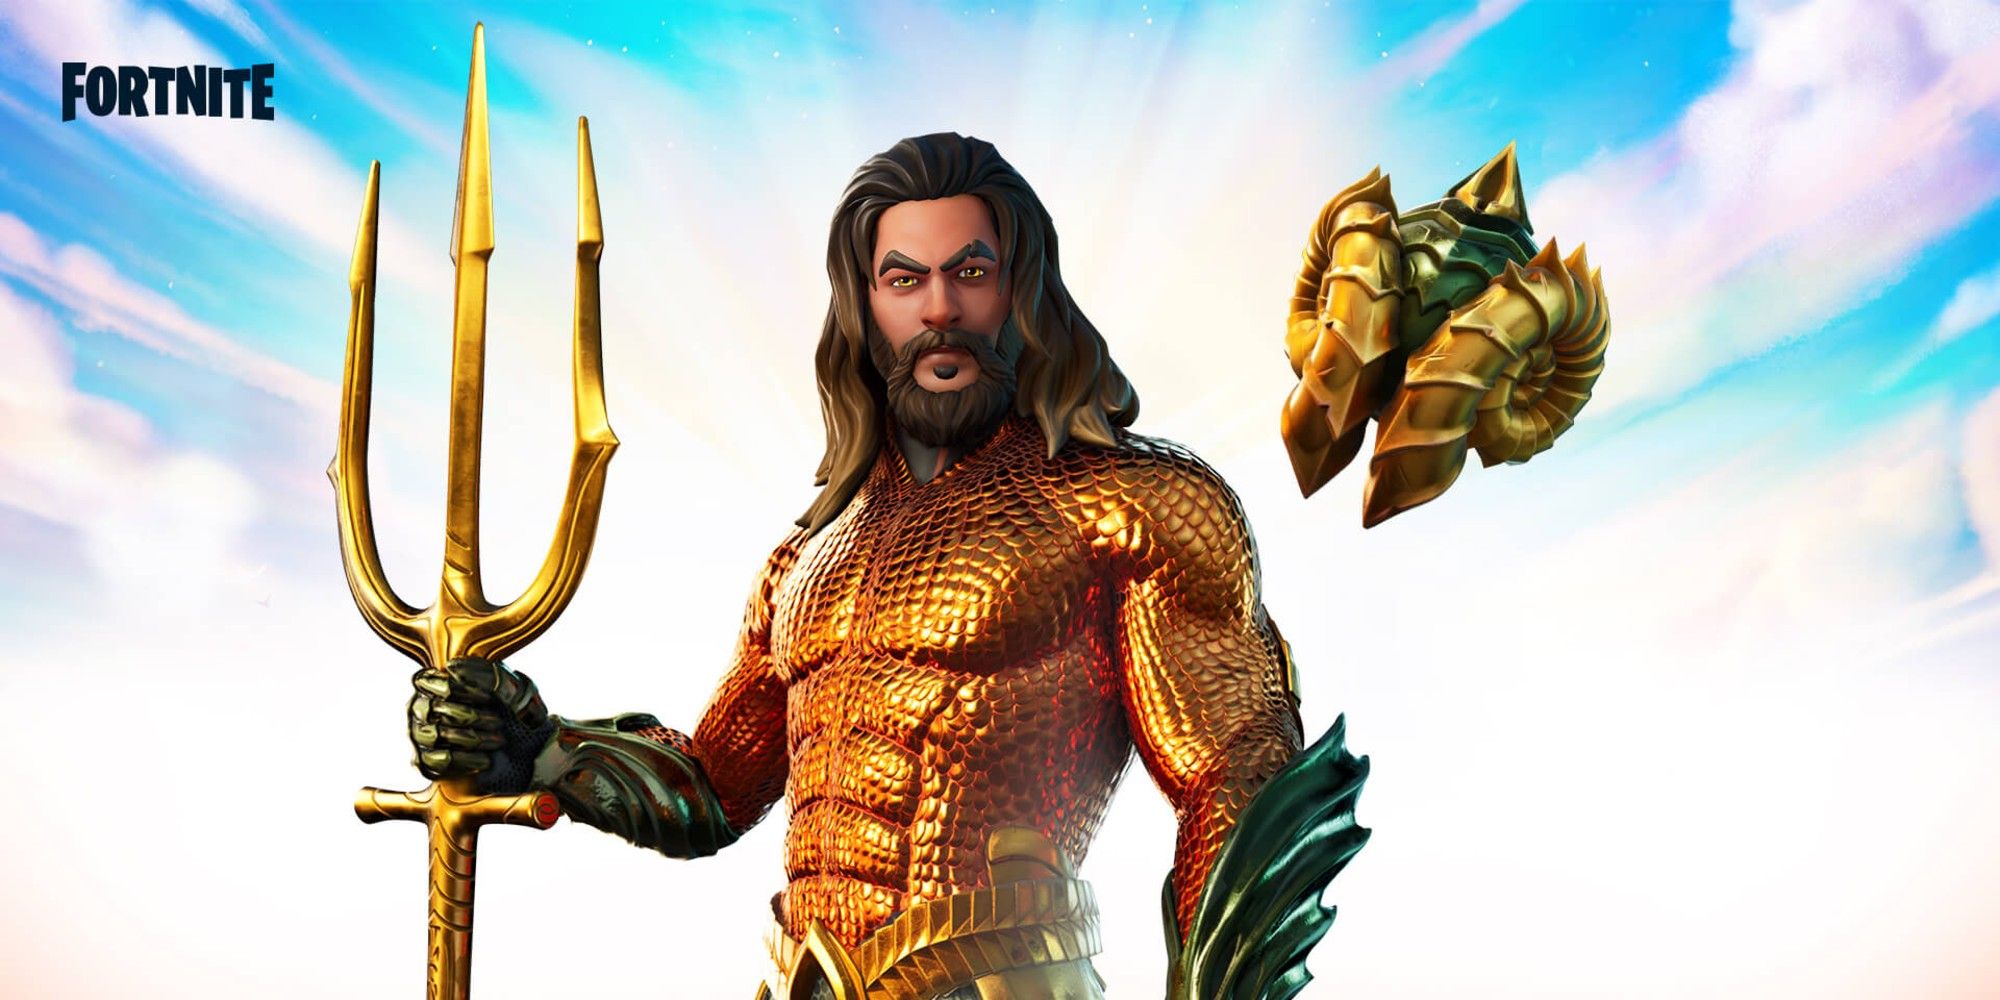 Players can get the Aquaman skins and Aquaman's Trident in Fortnite Season 3